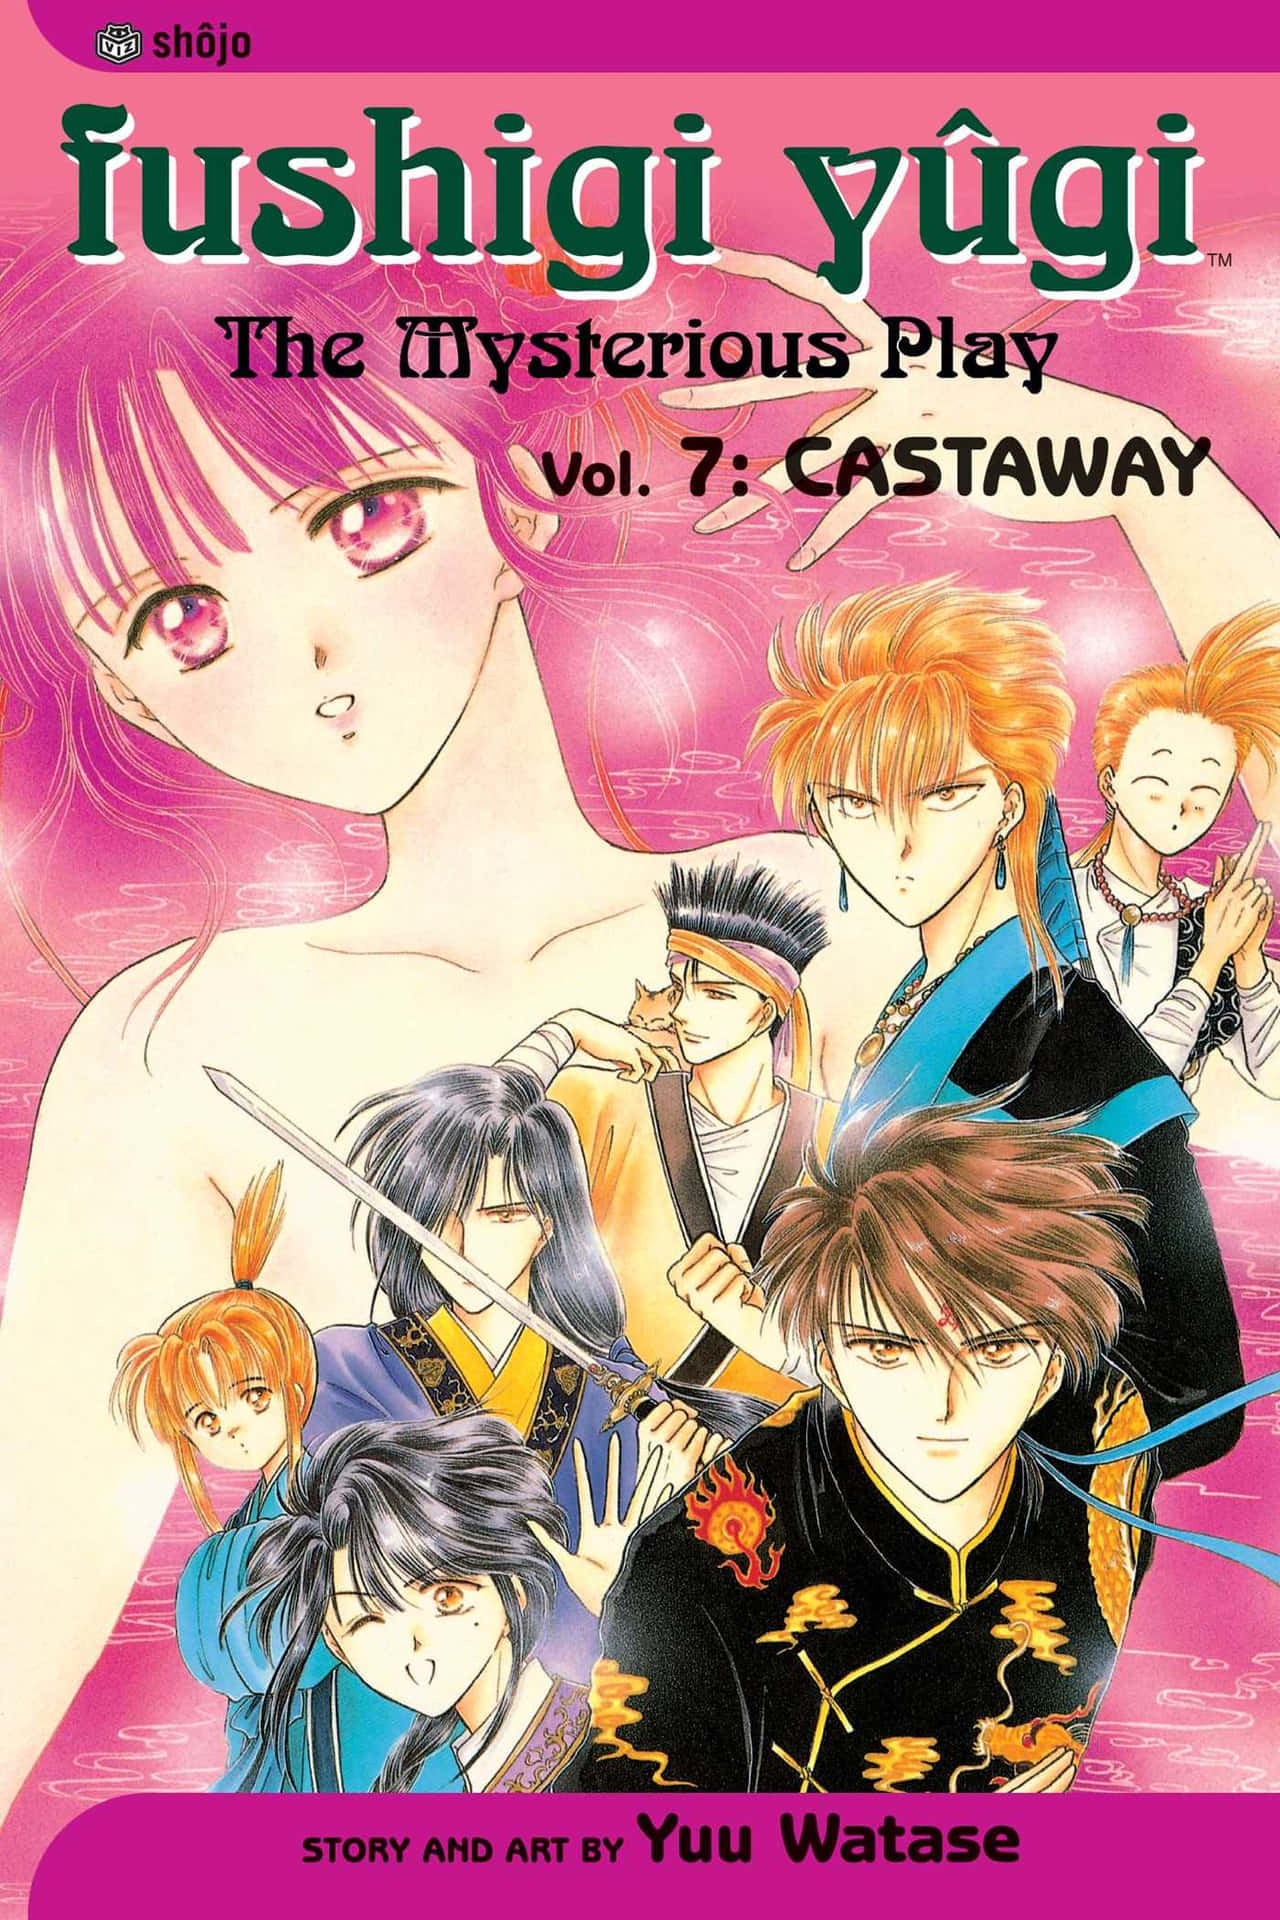 "The beloved characters from Fushigi Yuugi explore the uncharted corners of their world"